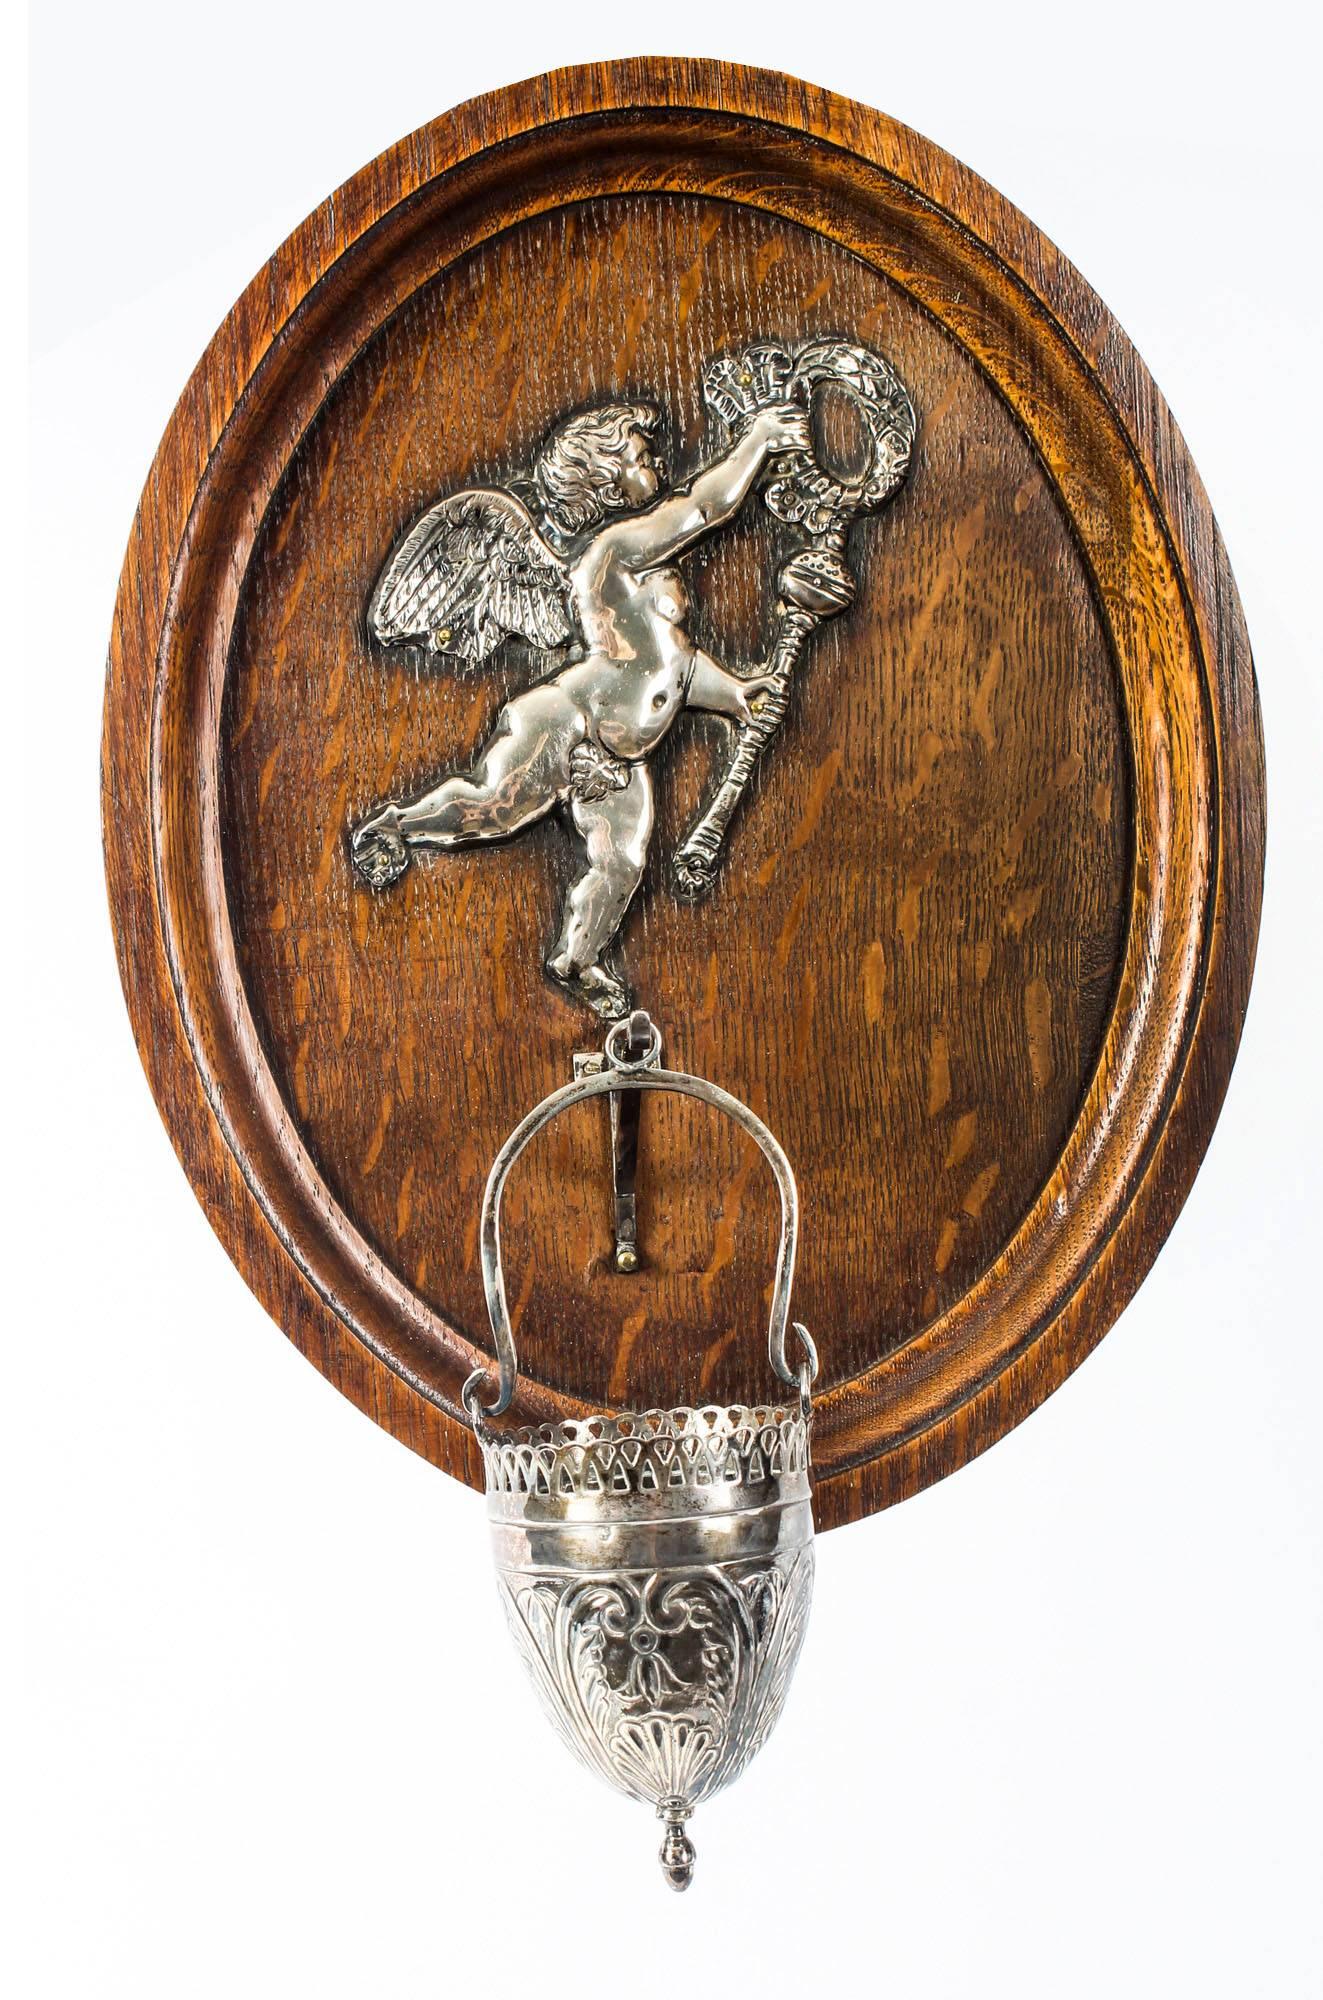 This is a beautiful 19th century pair of French wall-mounted holy water stoops.

The oval oak back panels are mounted with decorative silver plated winged cherubs with wreaths each carrying a mace, the water stoops on suspended